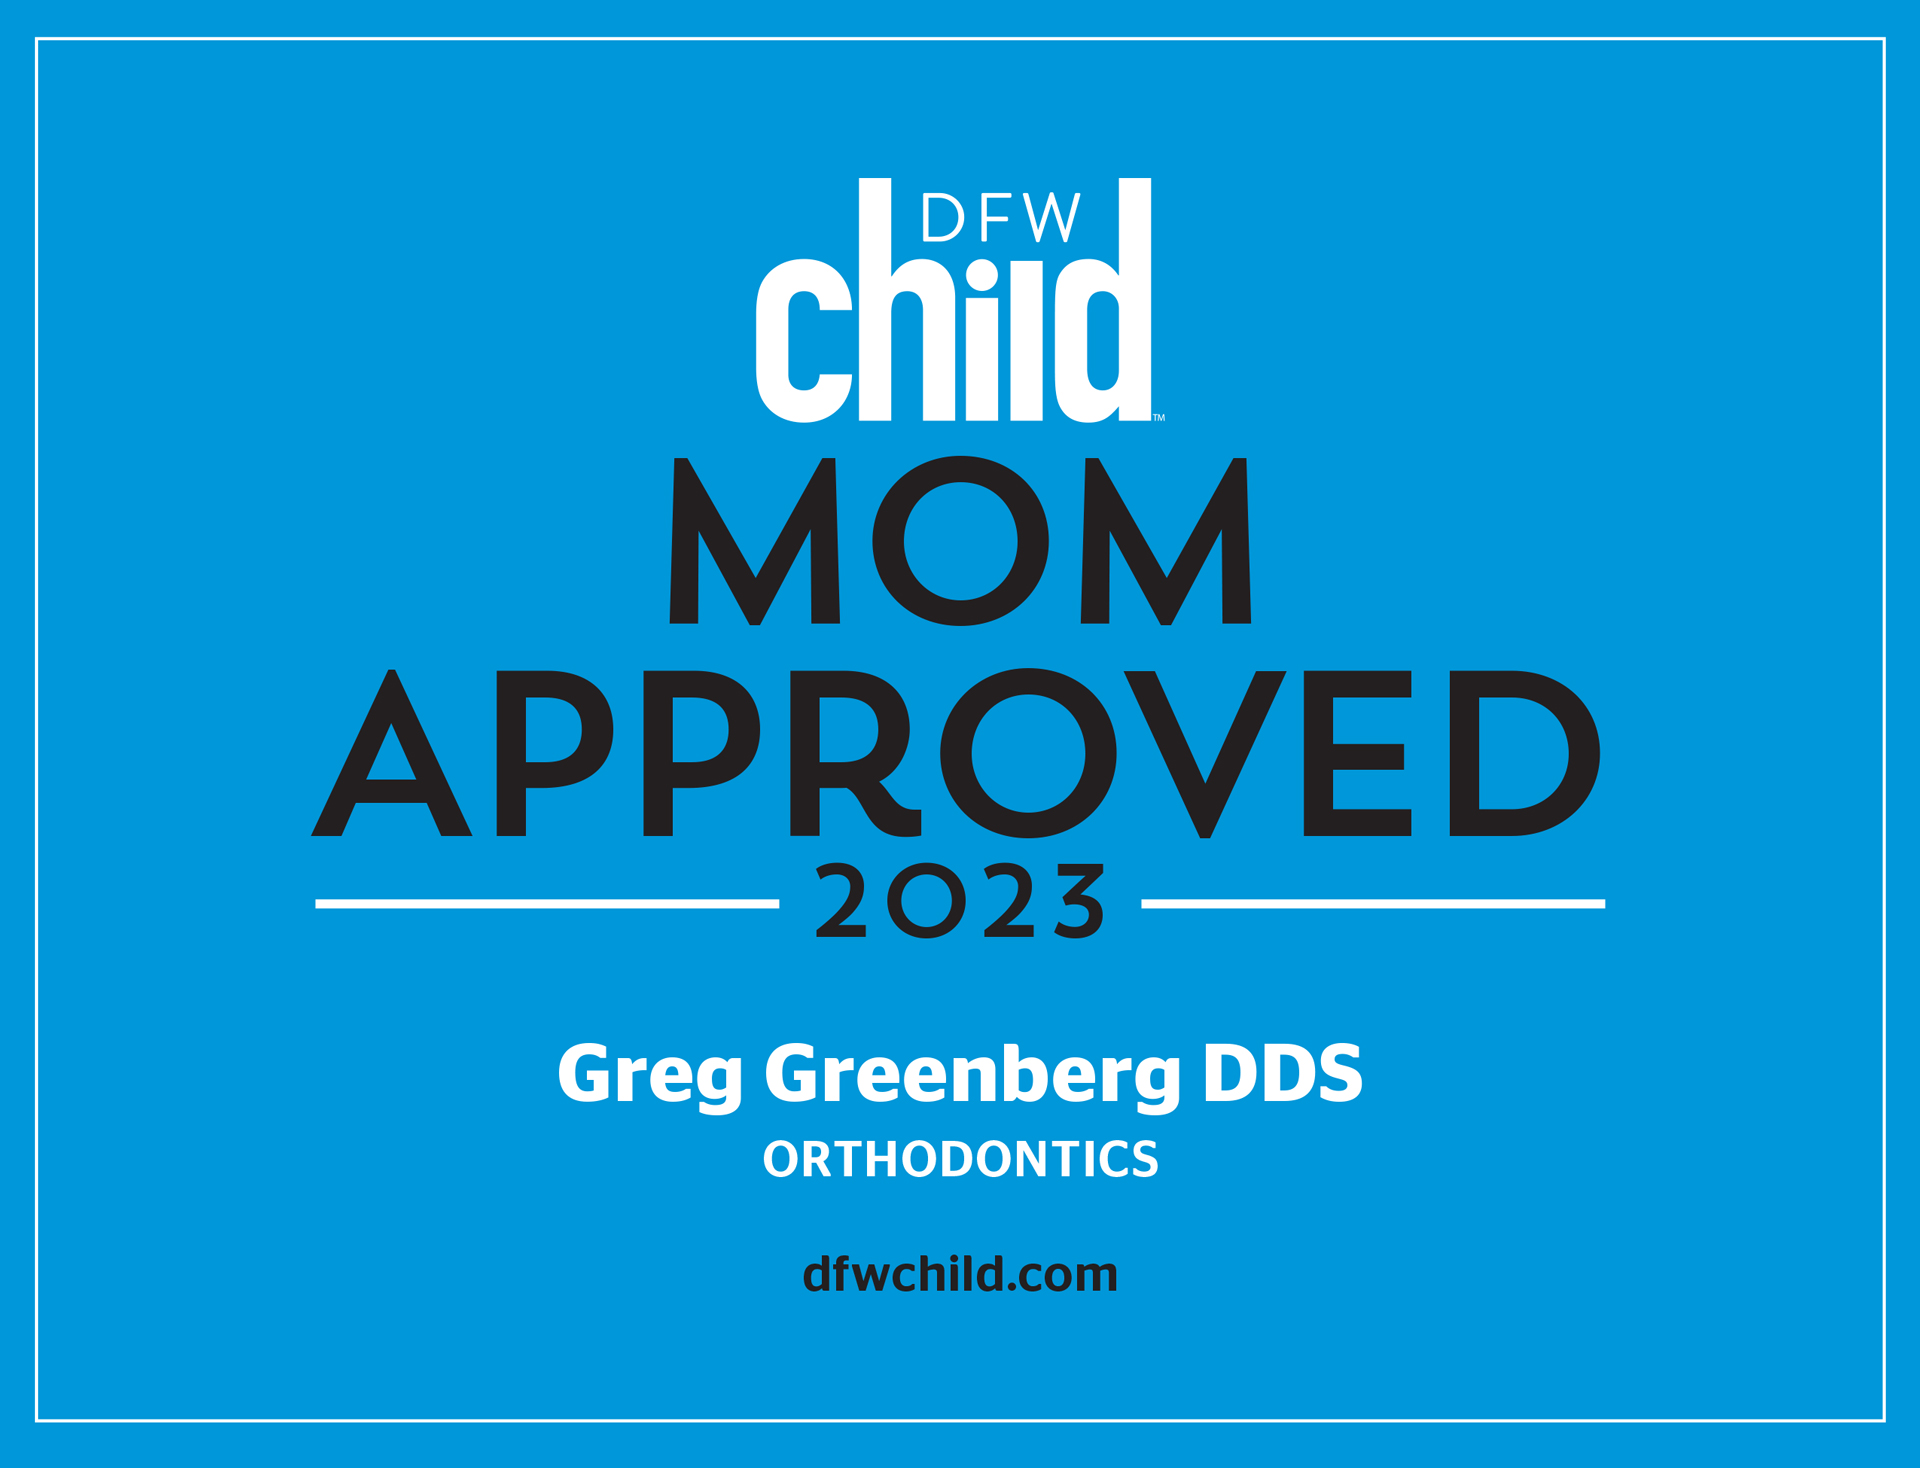 Dr Greenberg, Mom Approved orthodontist 2023